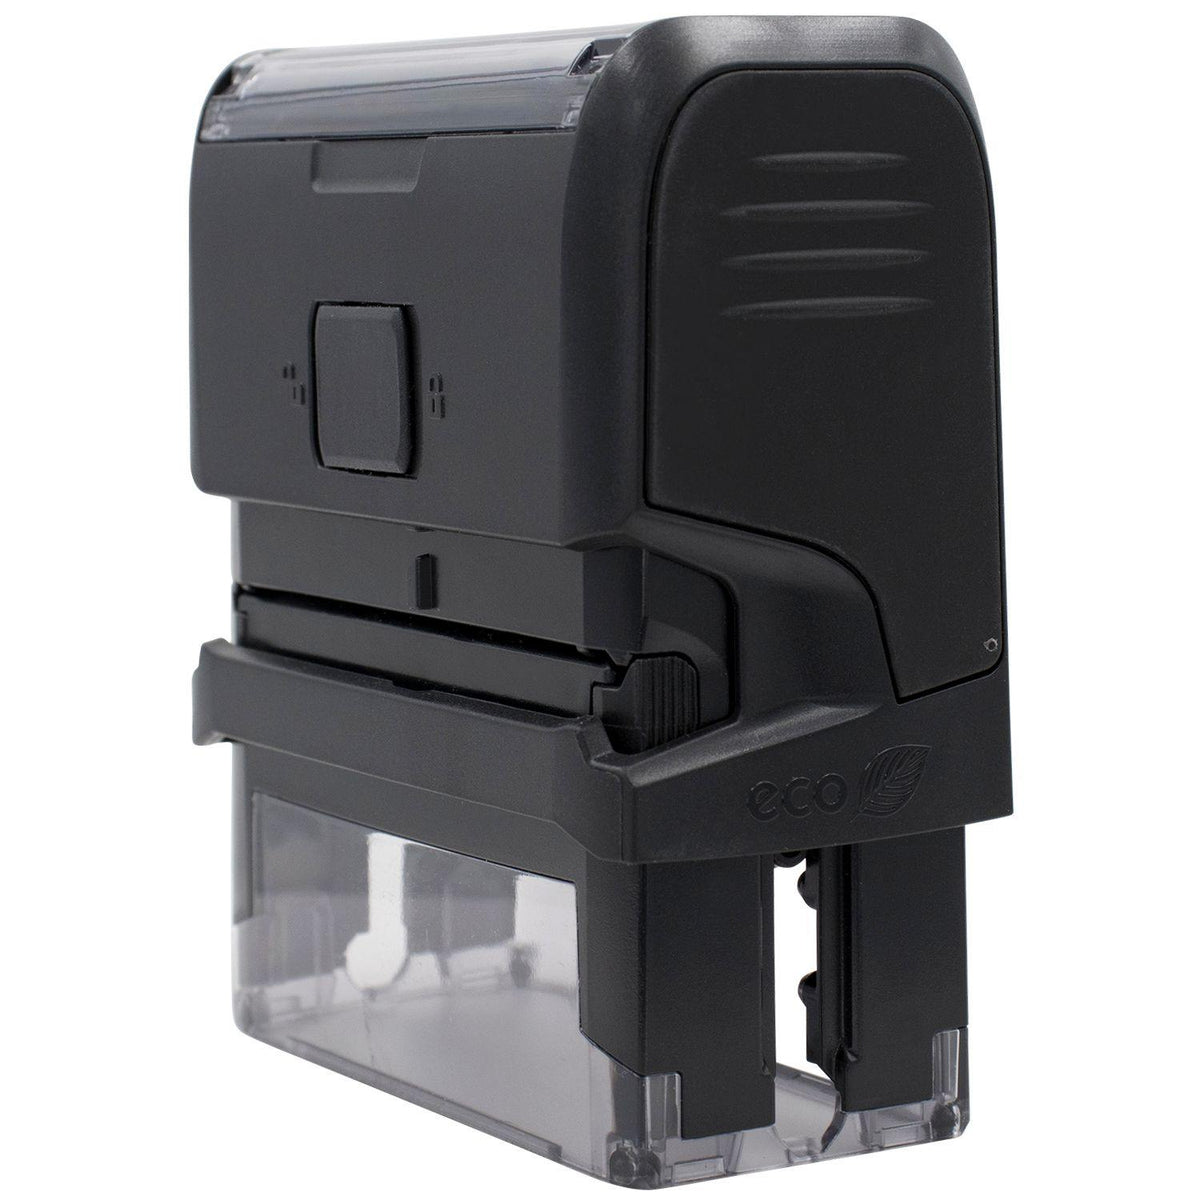 Large Self Inking Notarize Stamp - Engineer Seal Stamps - Brand_Trodat, Impression Size_Large, Stamp Type_Self-Inking Stamp, Type of Use_Office, Type of Use_Professional